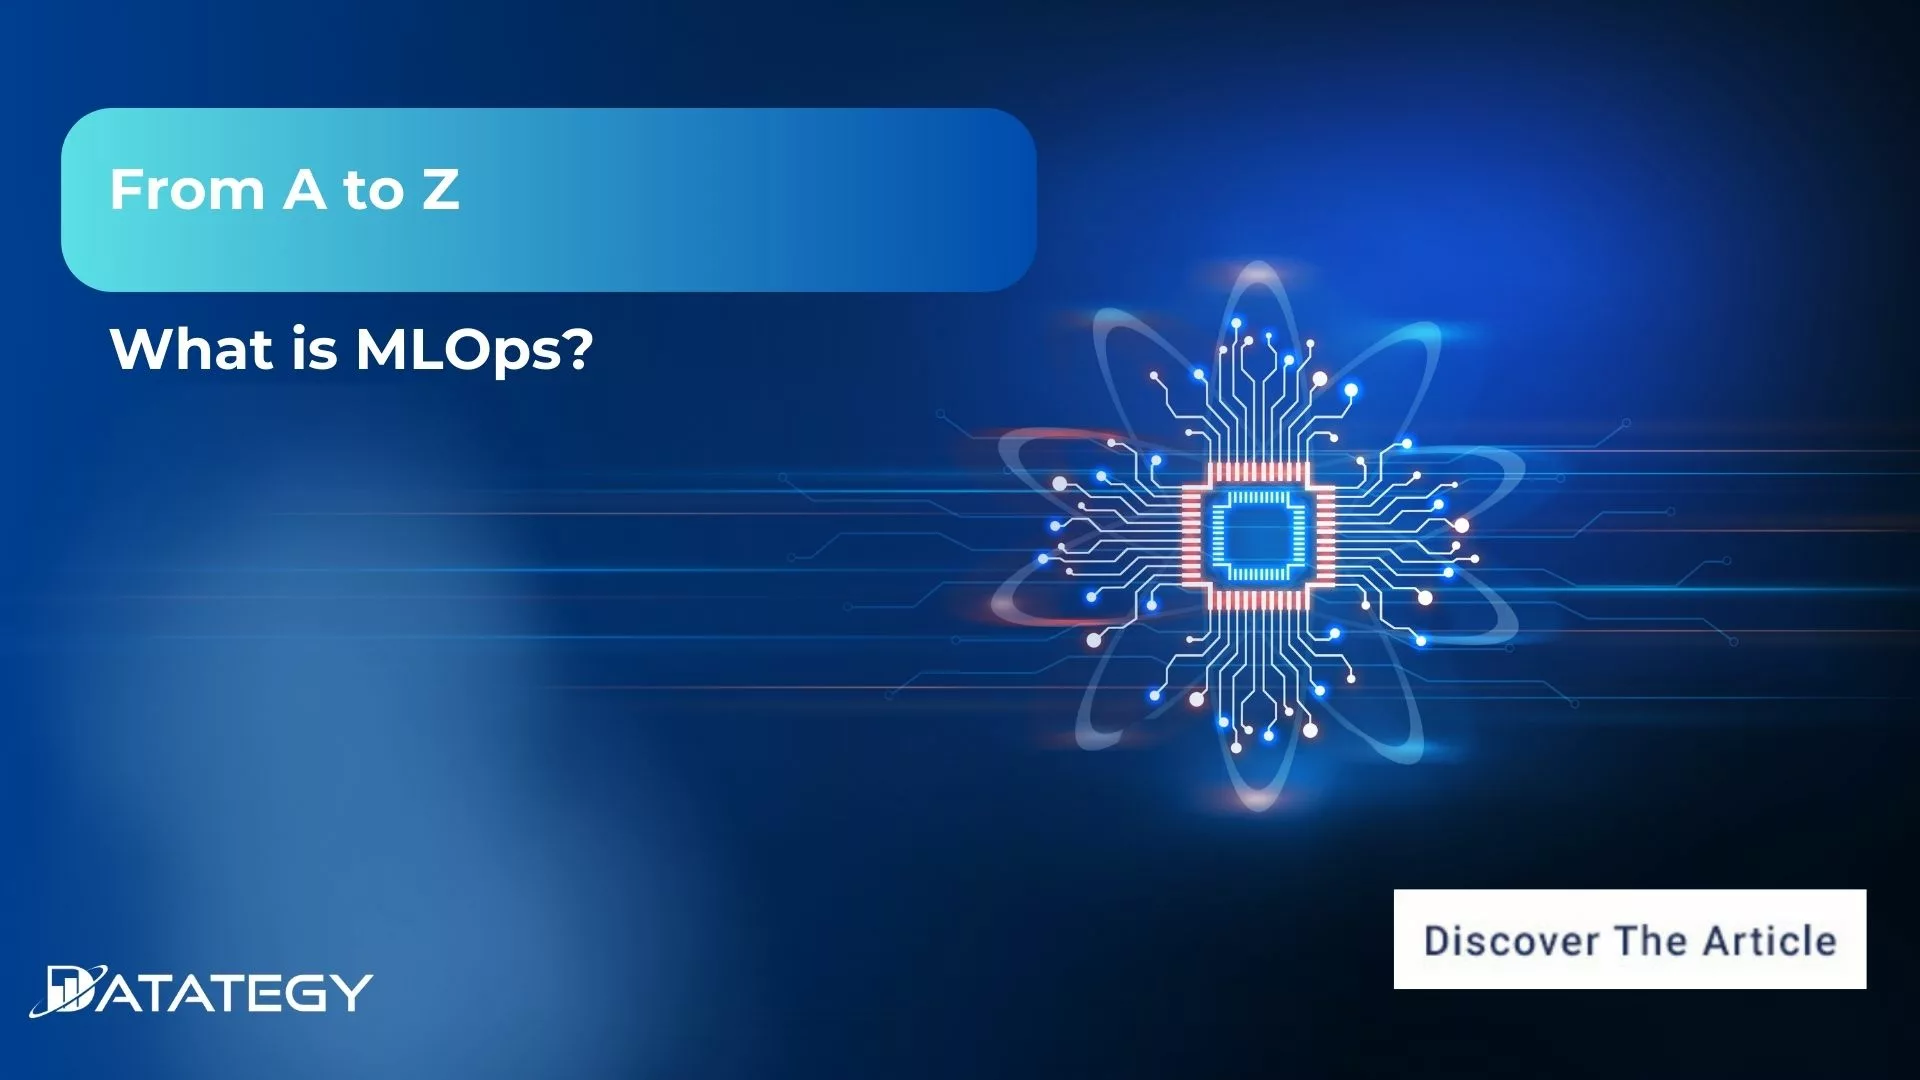 From A to Z: What is MLOps?